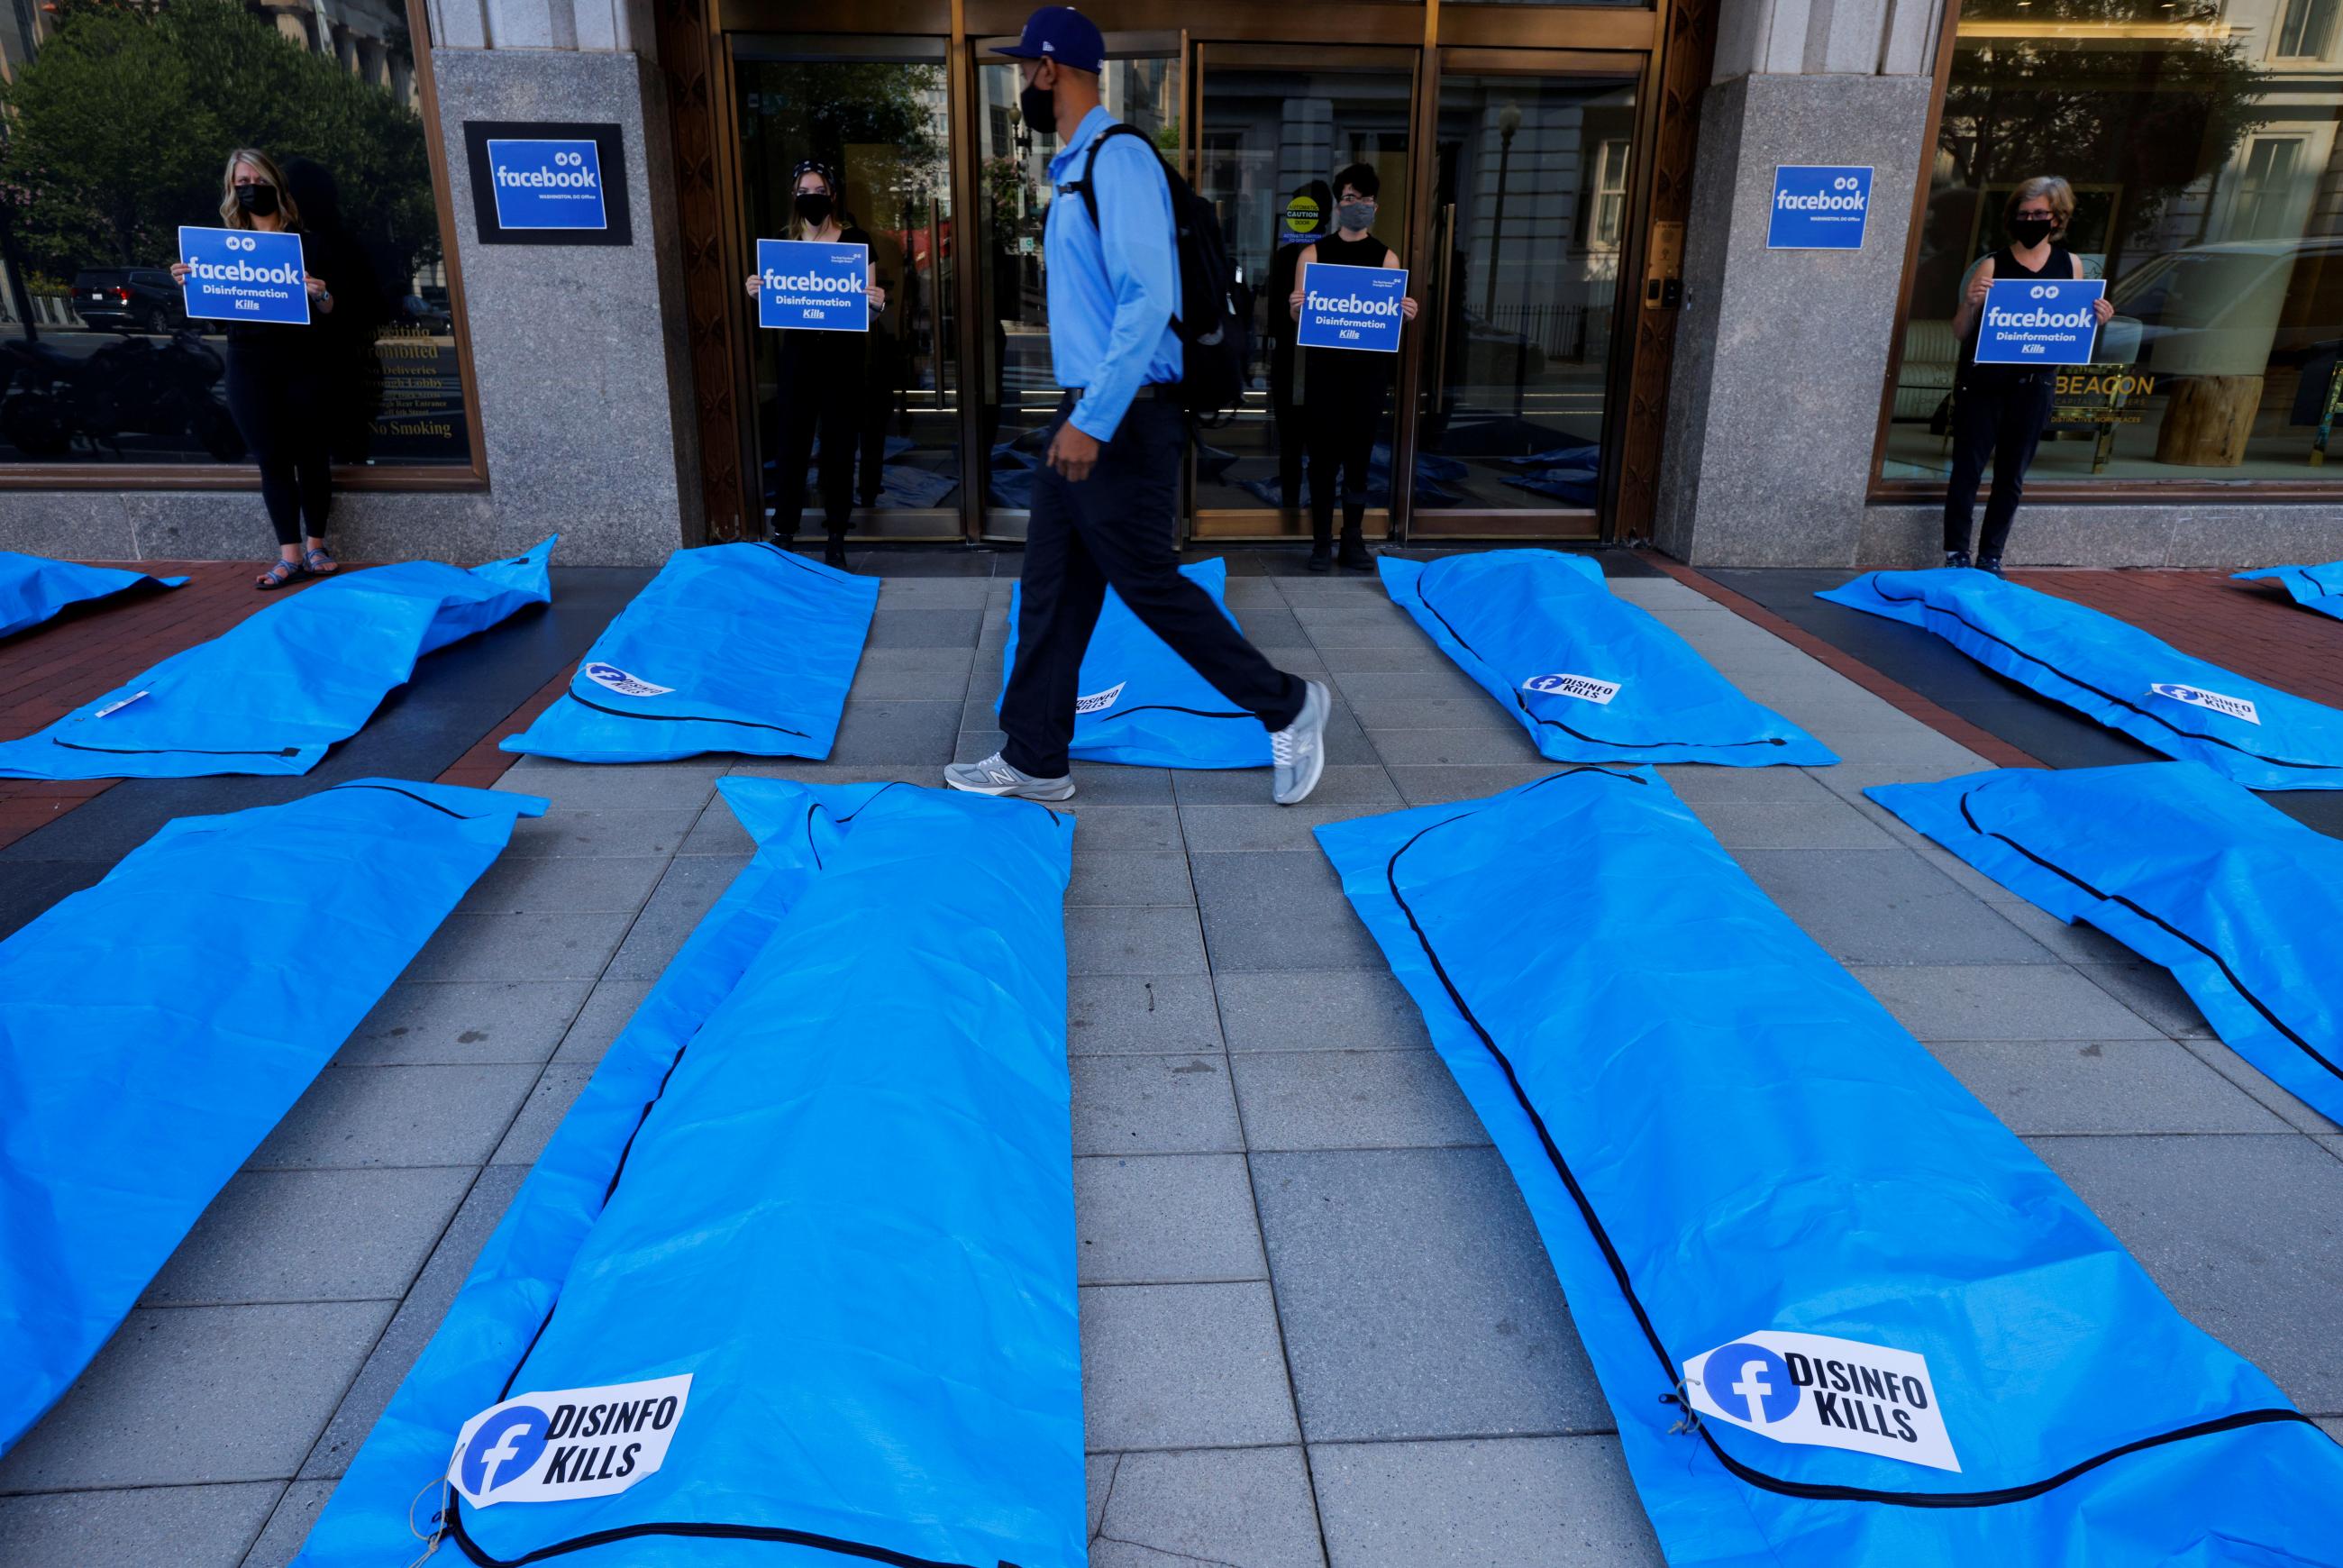 A man in a blue shirt and black mask walks through an art installation of bright blue body bags laid out on the sidewalk with labels that say "Disinfo kills"